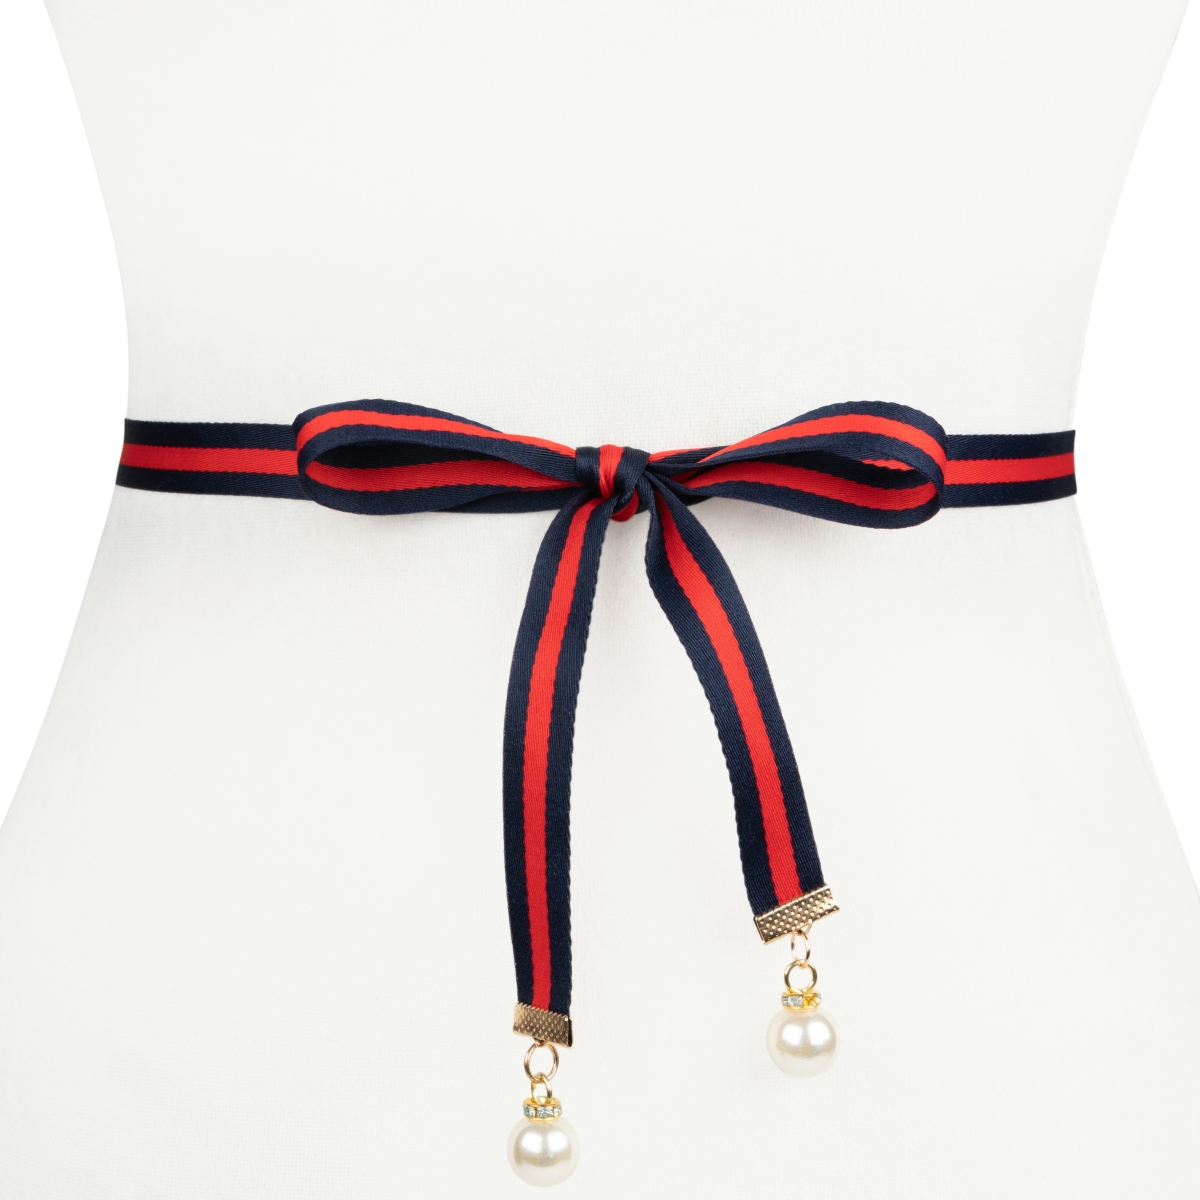 Wj41nr Womens Designer Pearl Ribbon Belt, Navy & Red - Extra Small & Extra Large